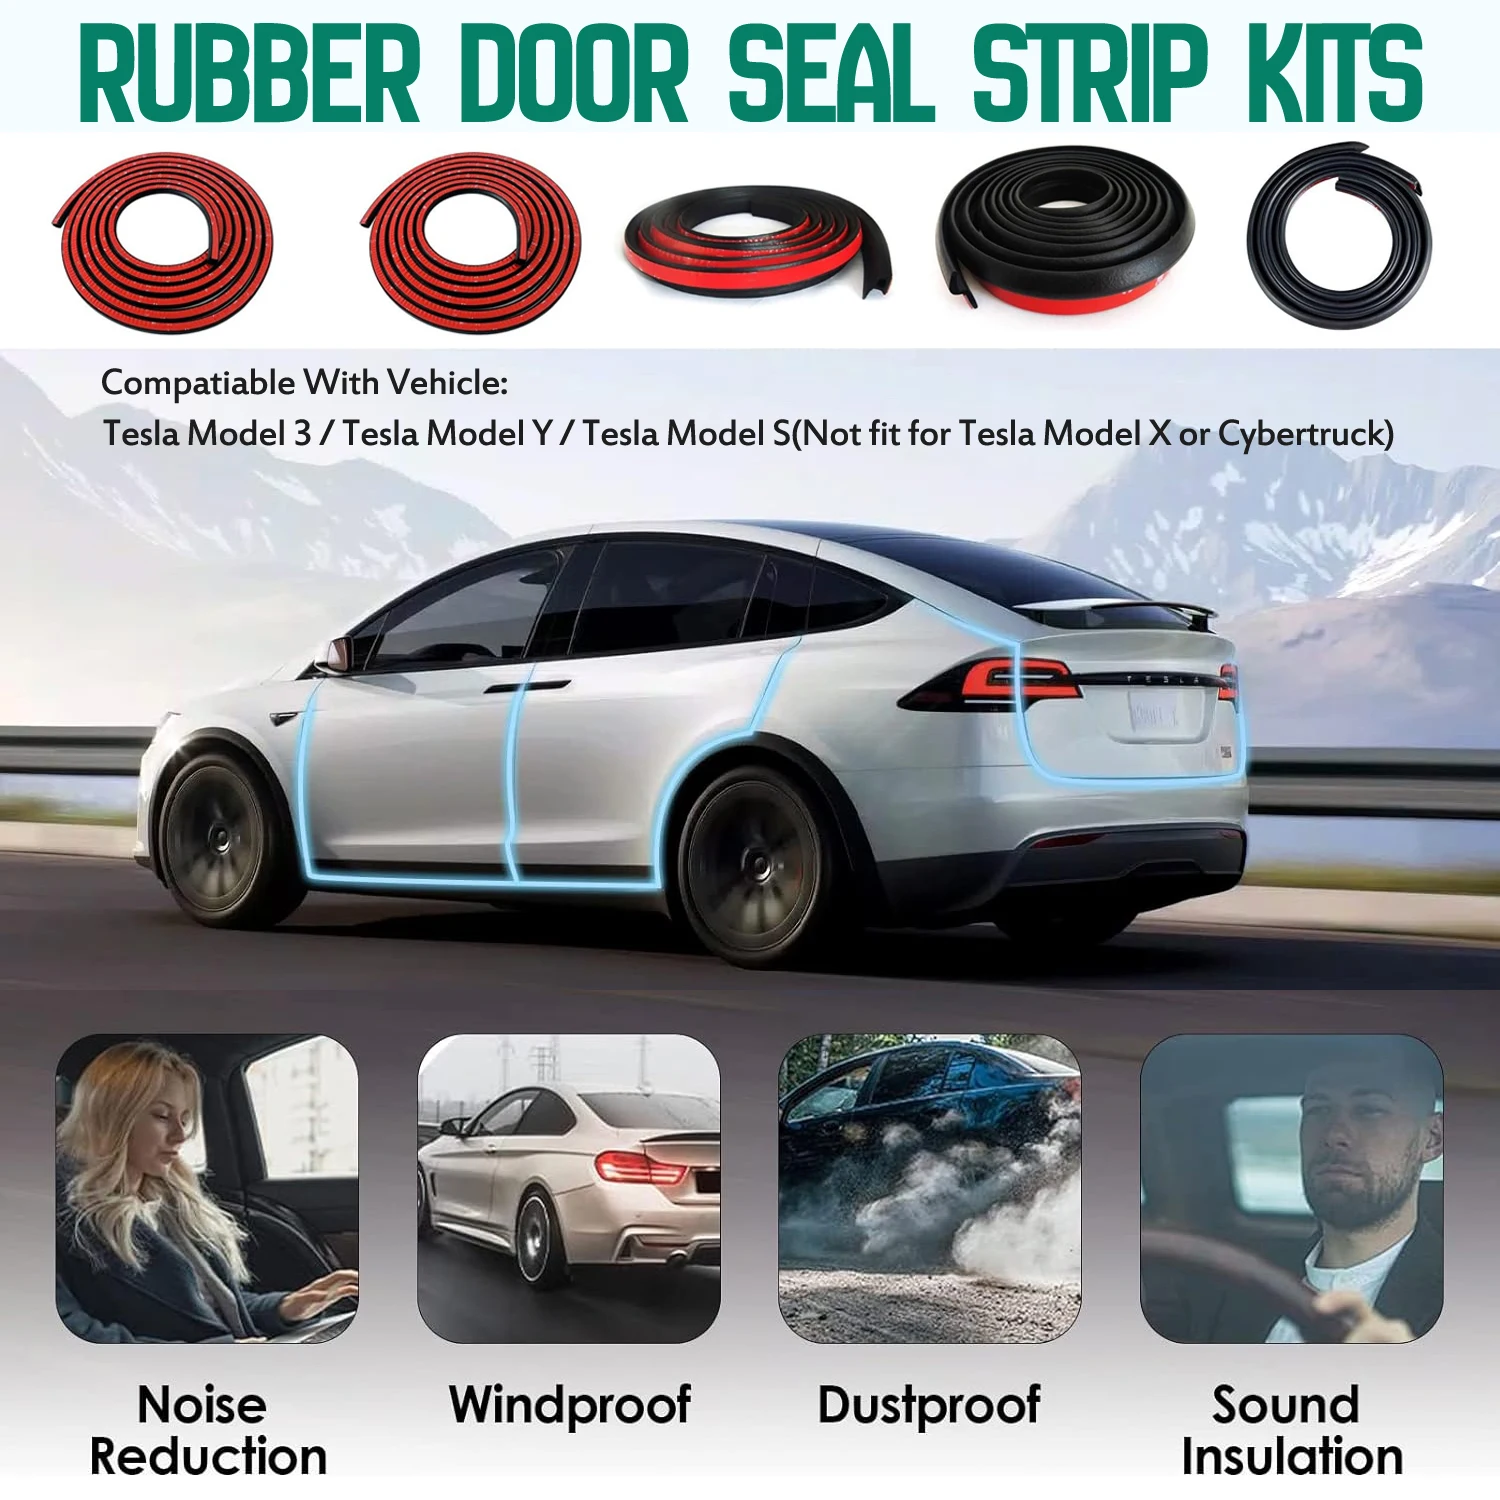 

Door Seal Strip Kit Self Adhesive Window Engine Cover Soundproof Rubber Weather Draft Wind Noise Reduction For Tesla Model 3 Y S